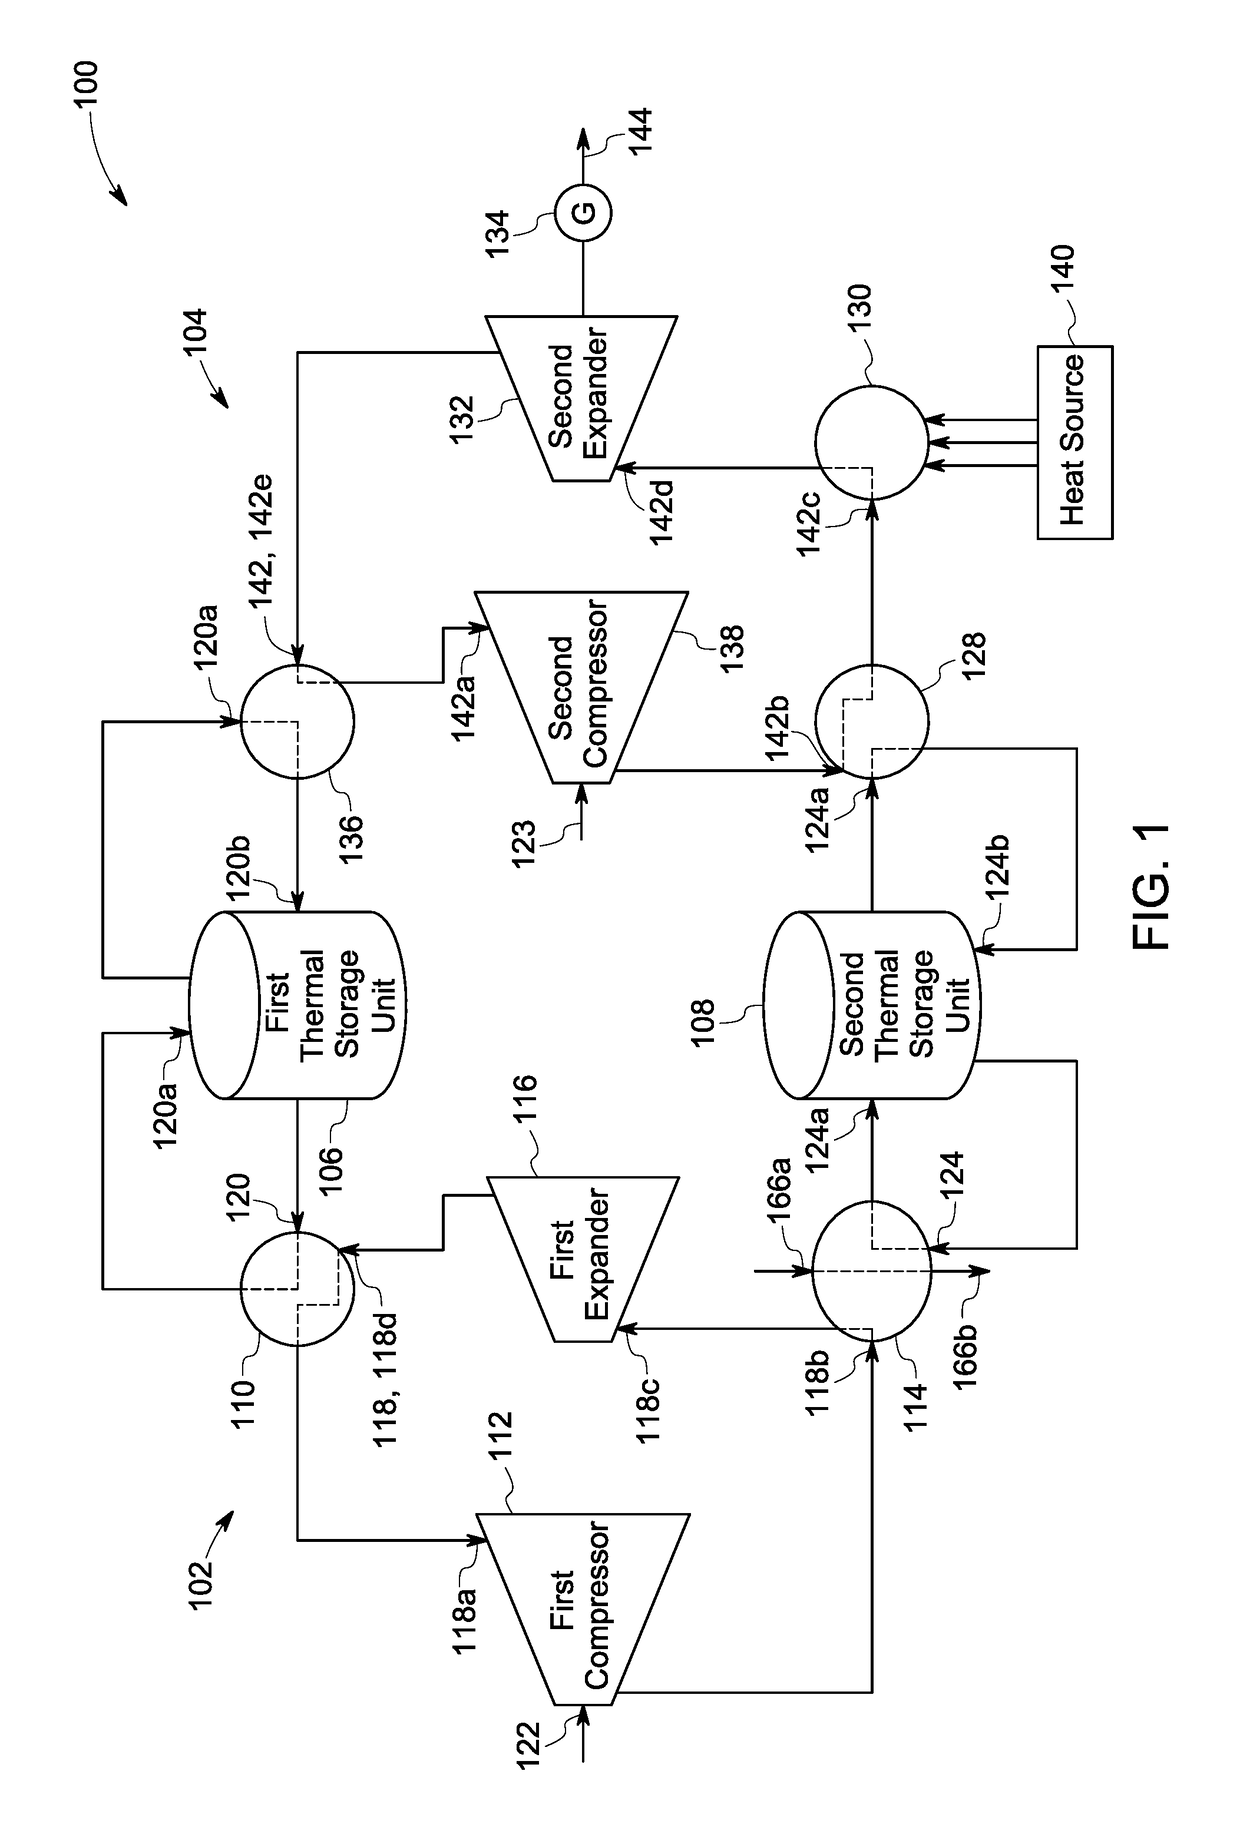 Thermoelectric energy storage system and an associated method thereof